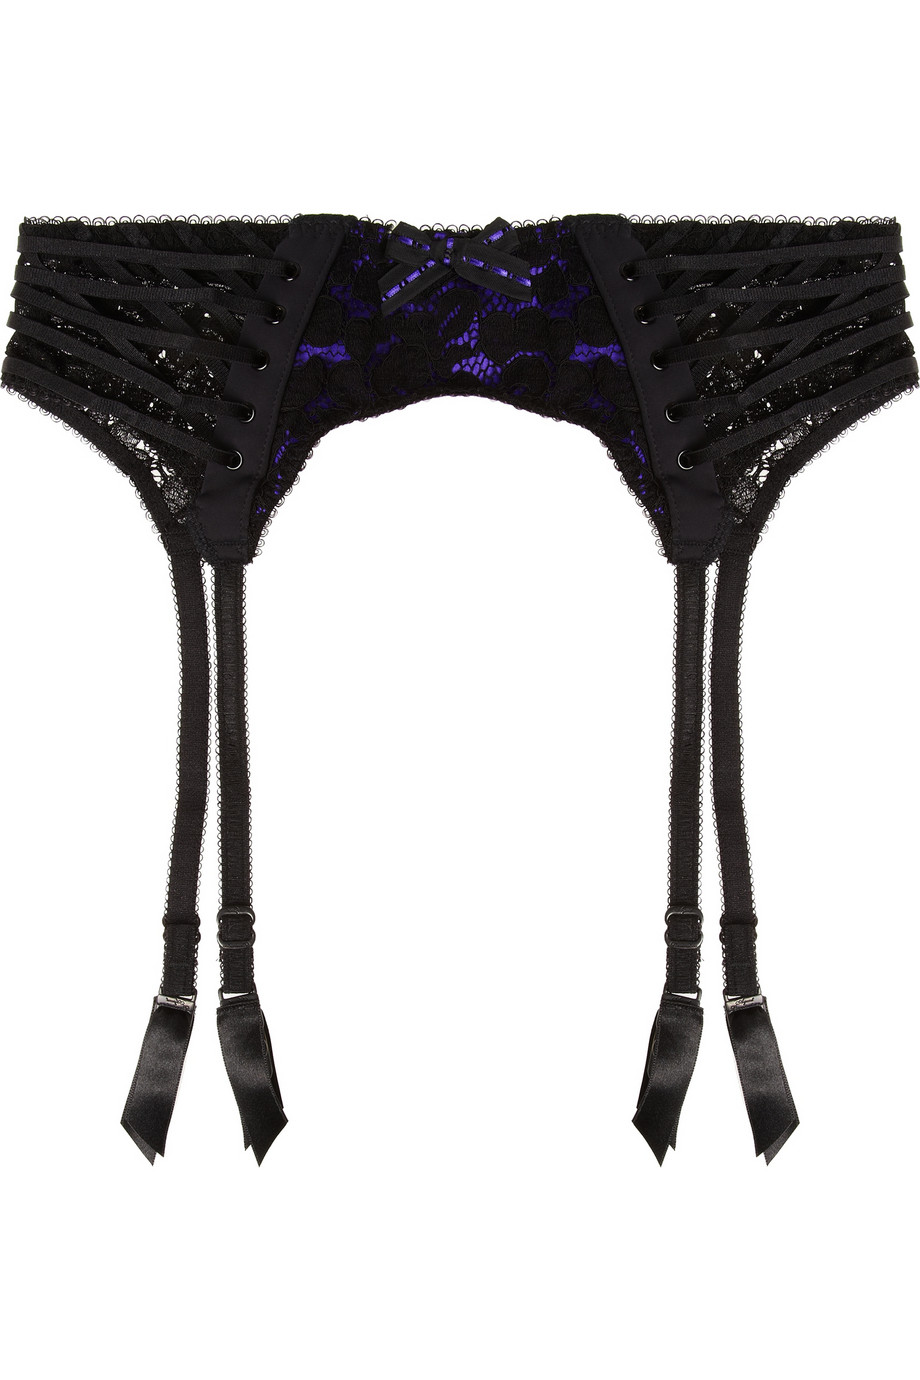 Agent Provocateur Rudy Lace and Silk Suspender Belt in Black | Lyst